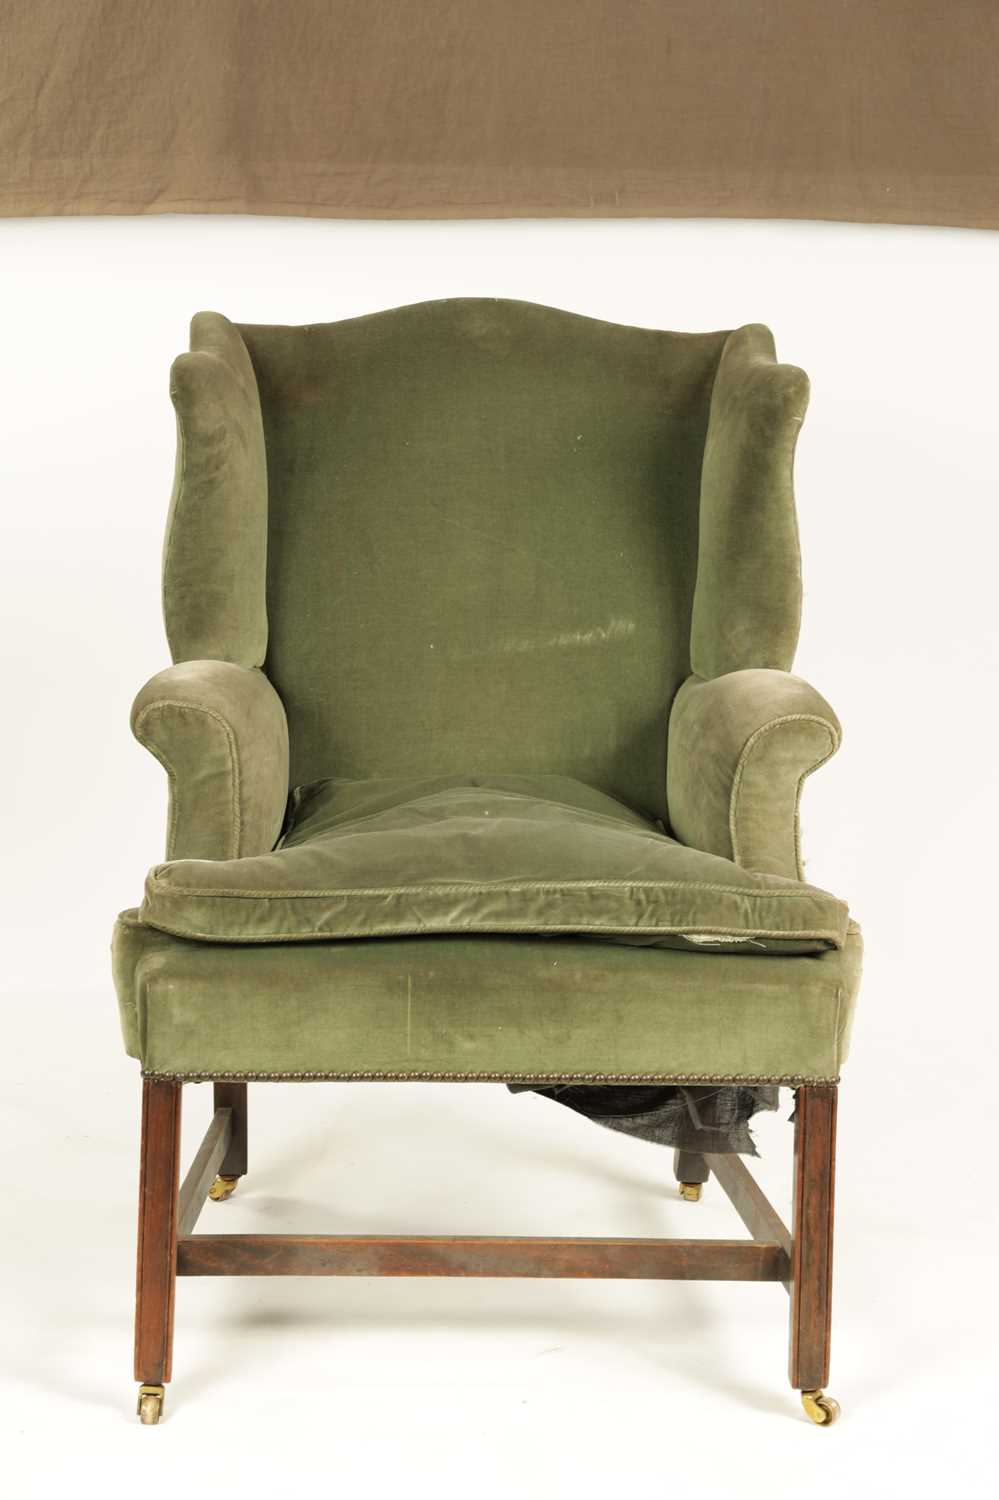 A GEORGE III WING-BACK MAHOGANY FRAMED UPHOLSTERED ARMCHAIR - Image 2 of 5